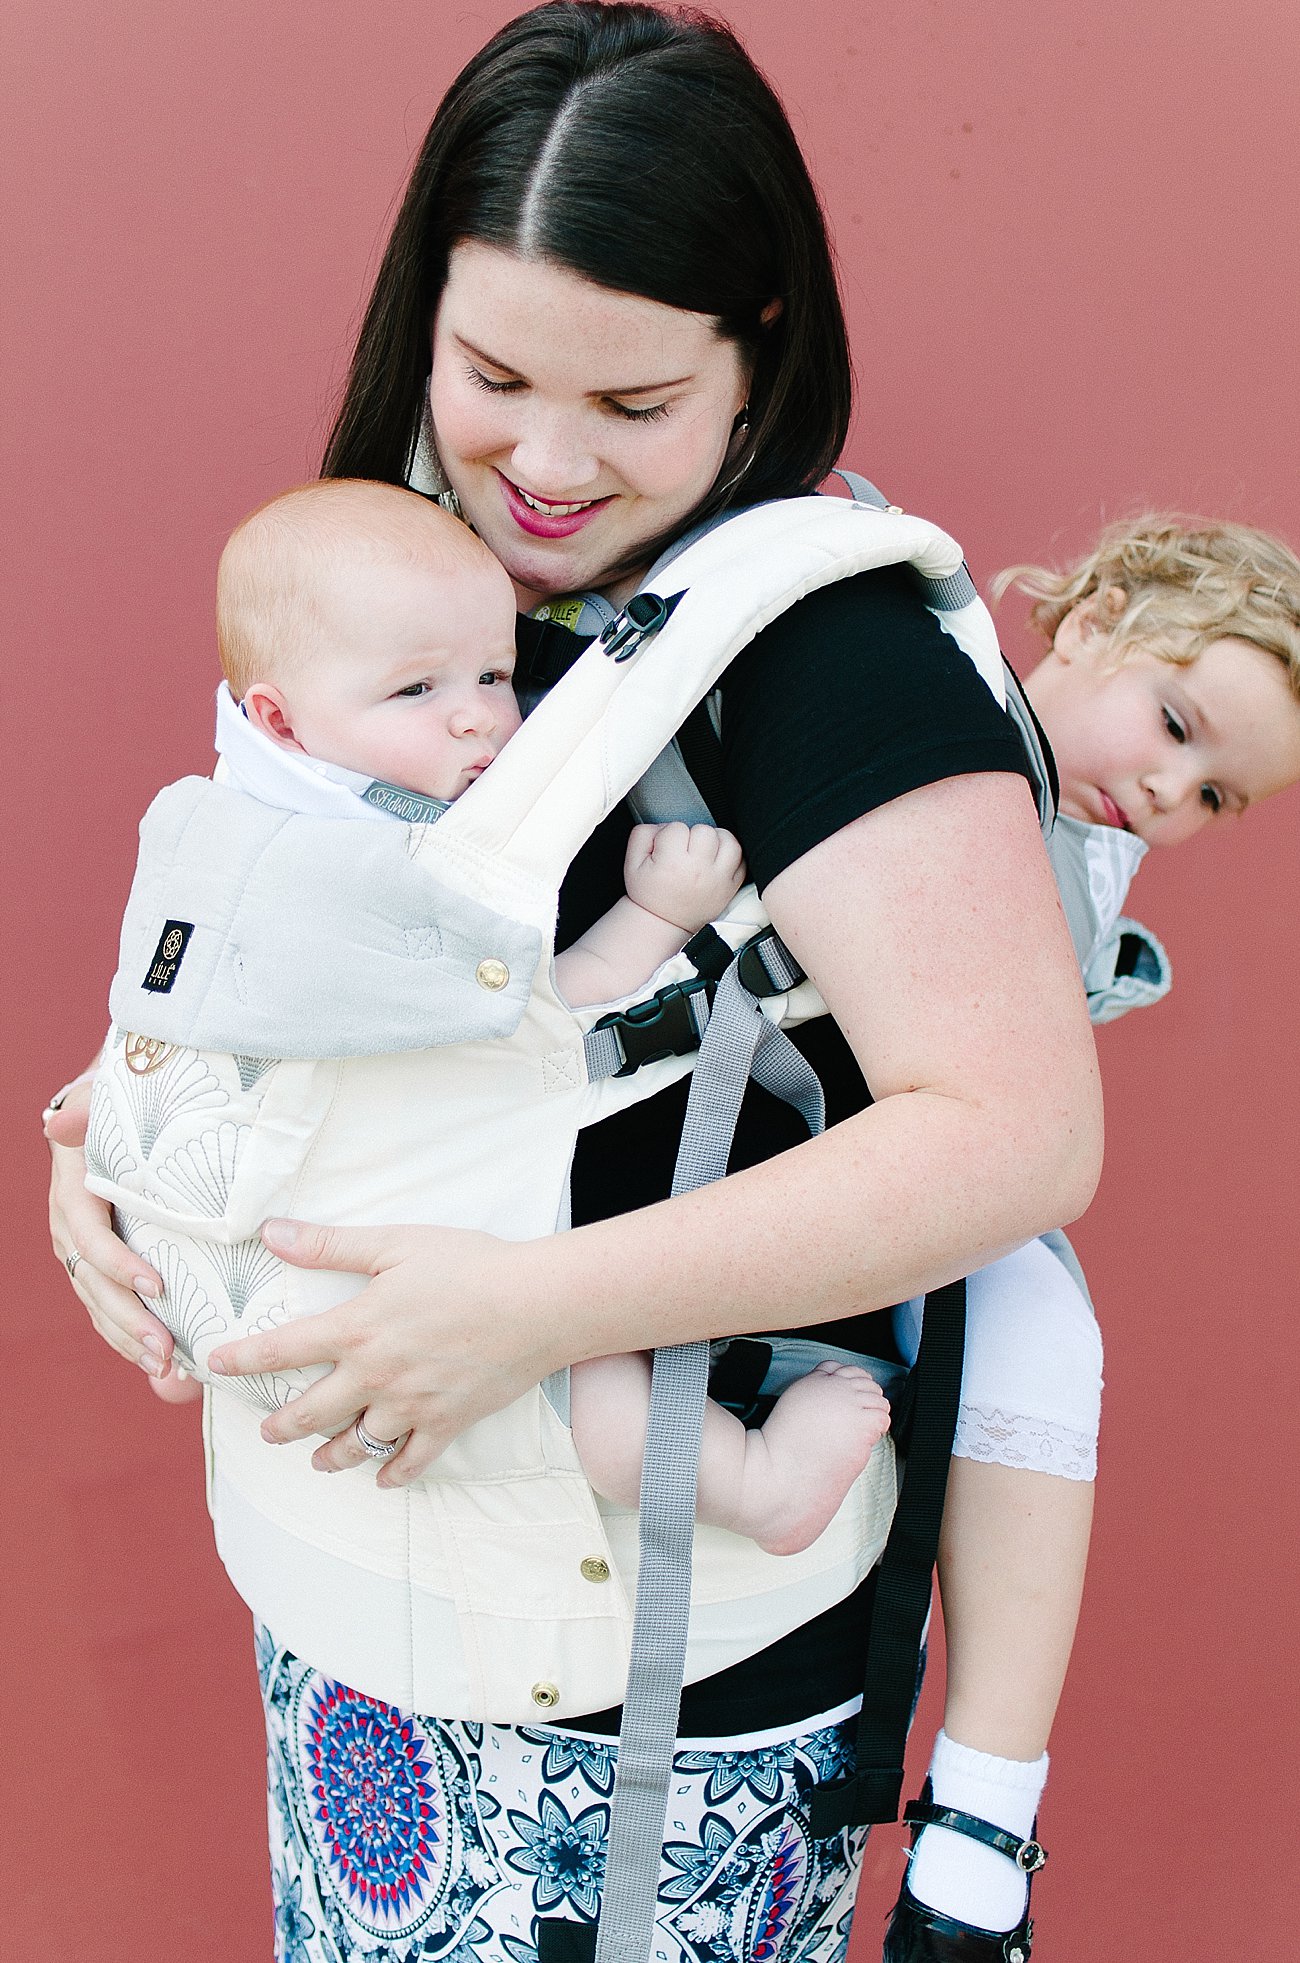 with Lillebaby Complete & CarryOn Baby Carriers #babywearing #tandemwearing #toddlerwearing (3)